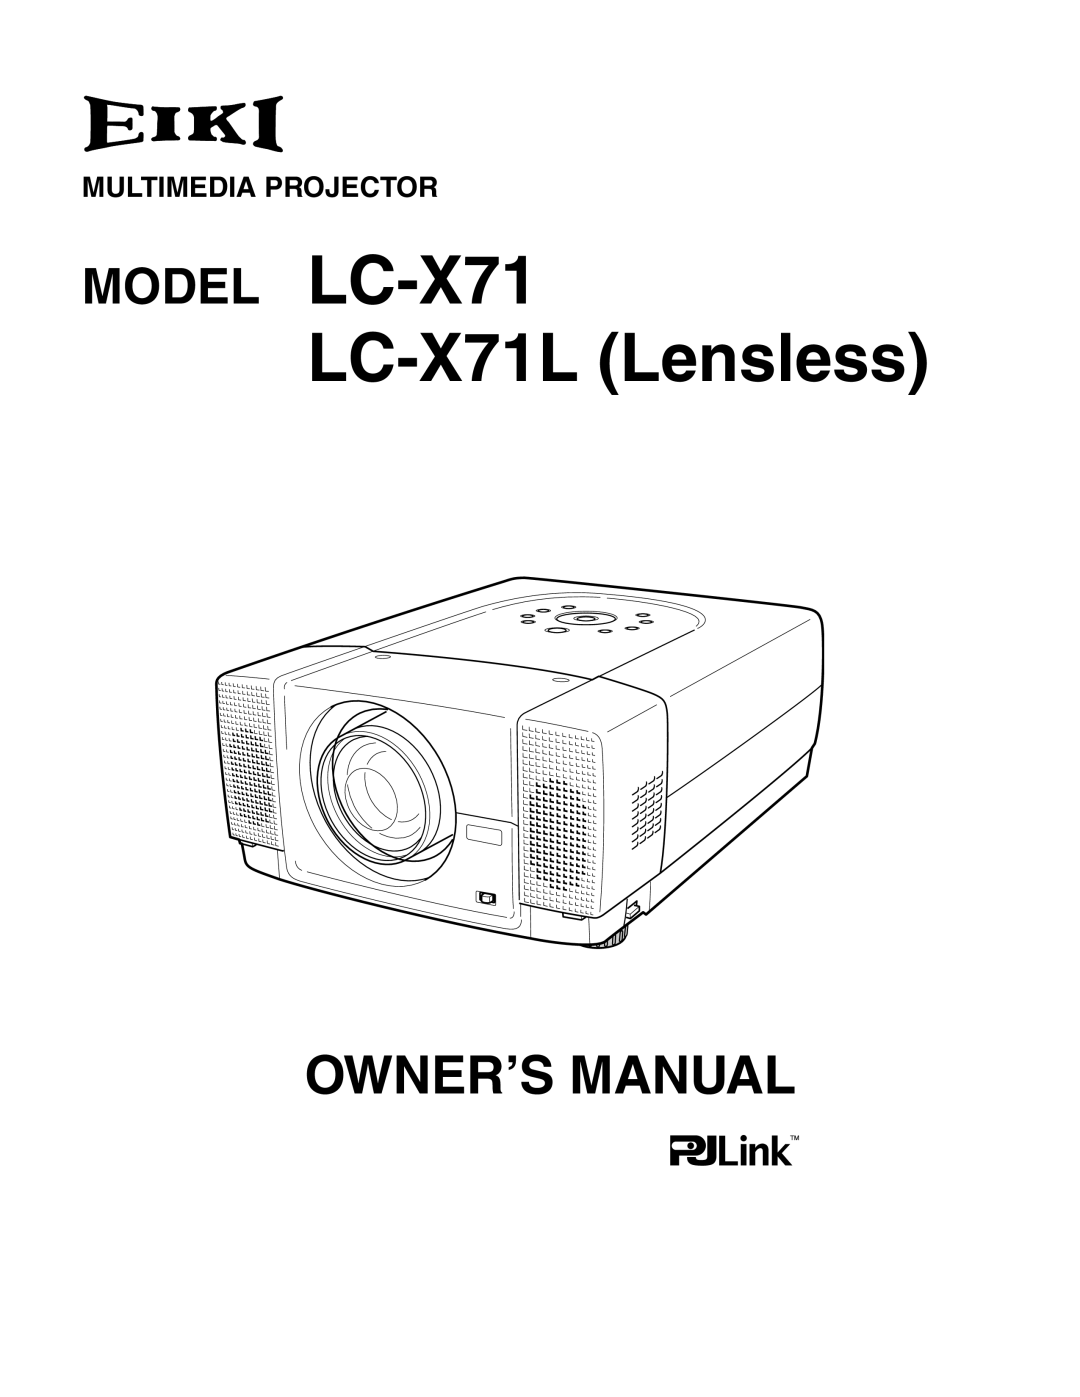 Eiki owner manual LC-X71L Lensless, MODEL LC-X71, Multimedia Projector 